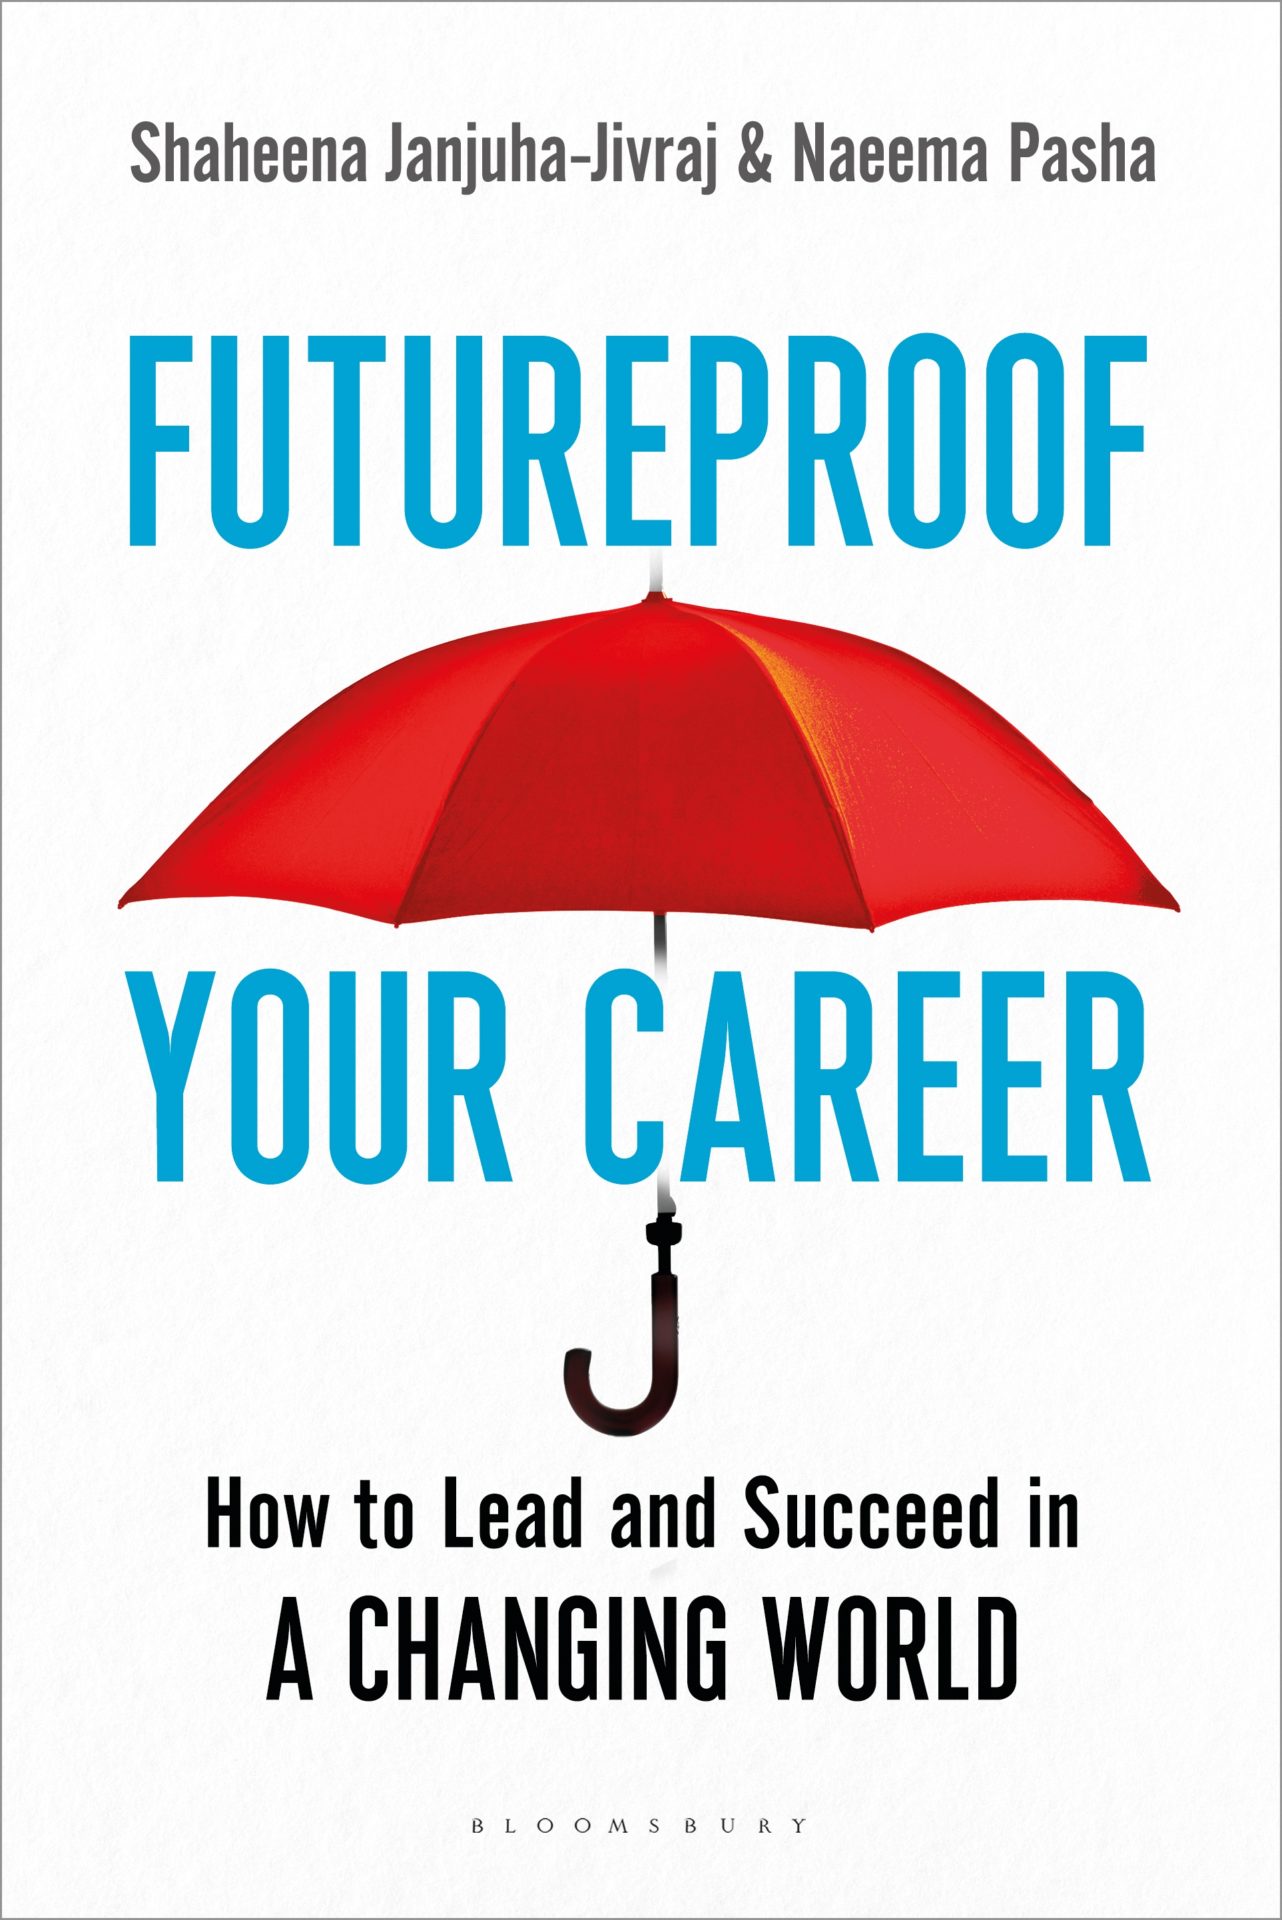 Futureproof Your Career in the AMBA Book Club